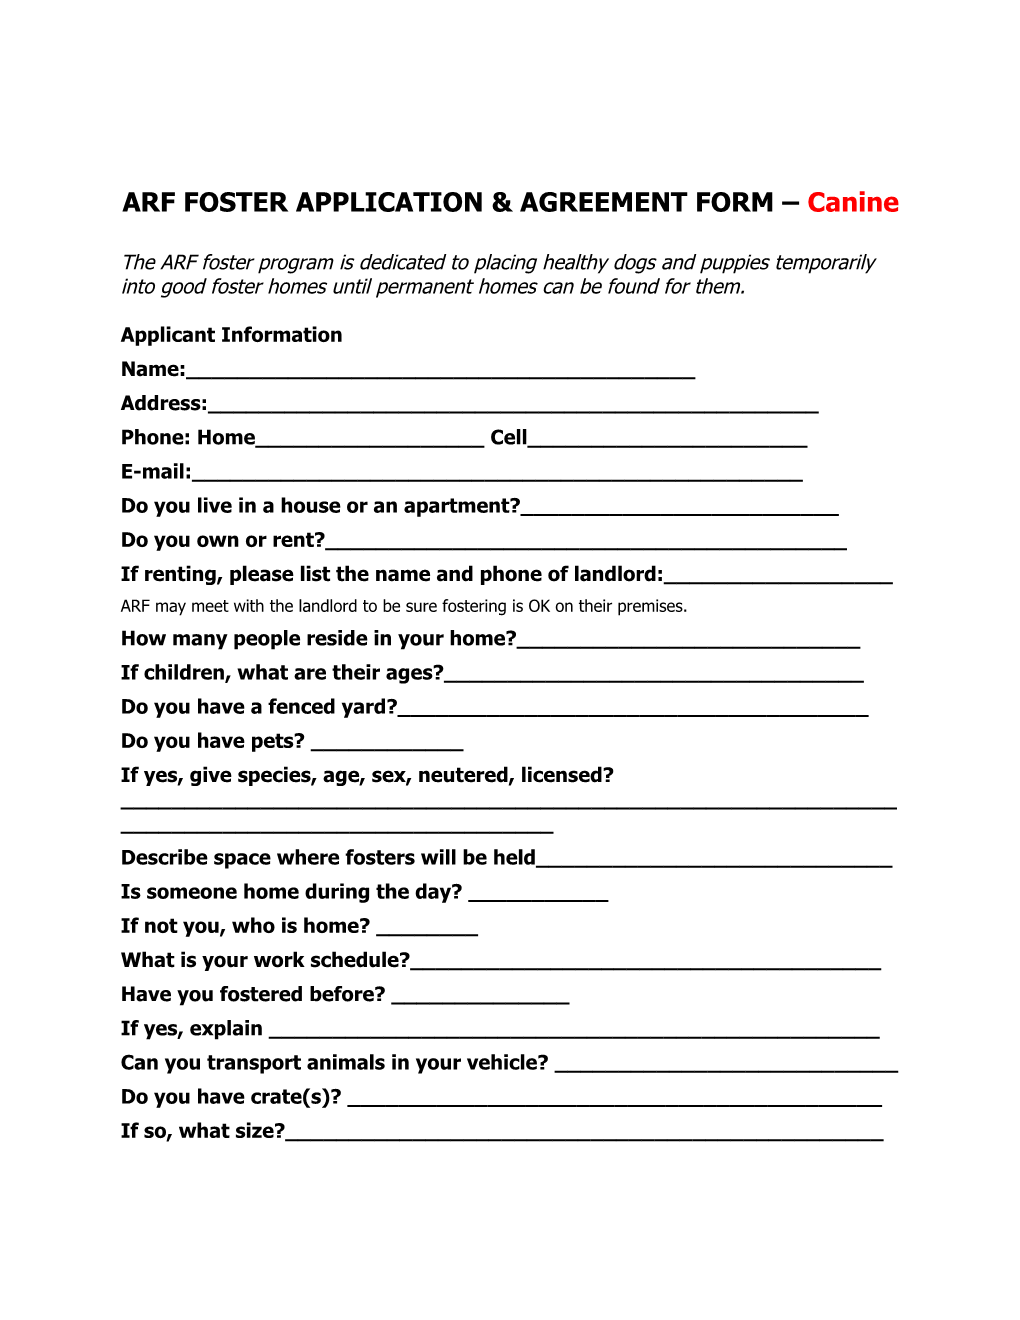 ARF FOSTER APPLICATION & AGREEMENT FORM Canine